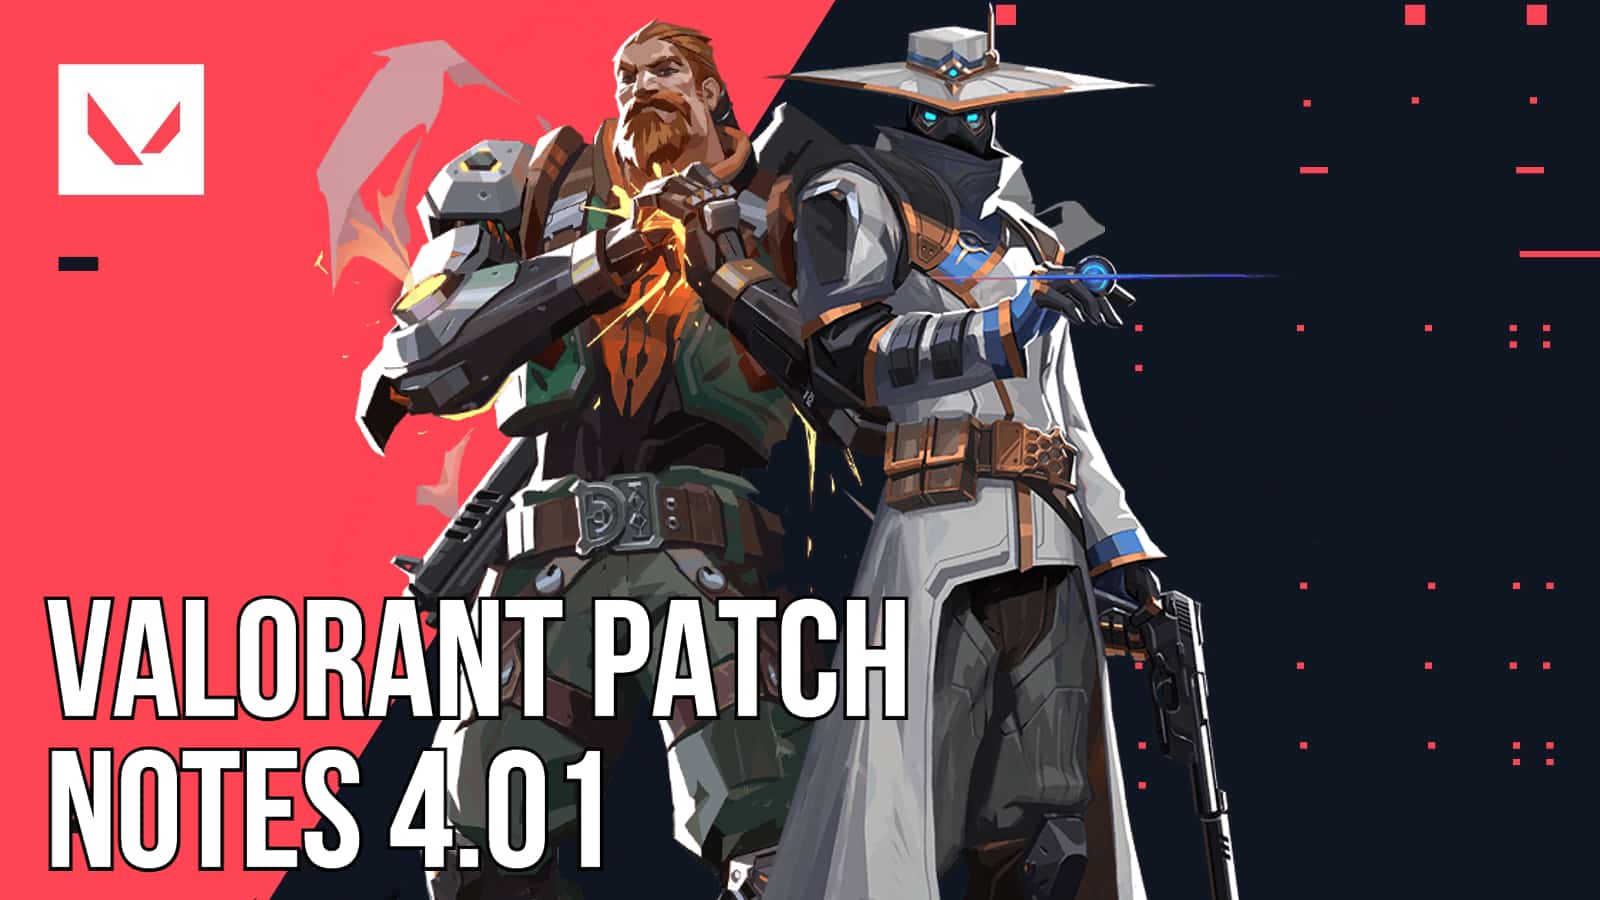 valorant patch notes 4.01 image breach and cypher